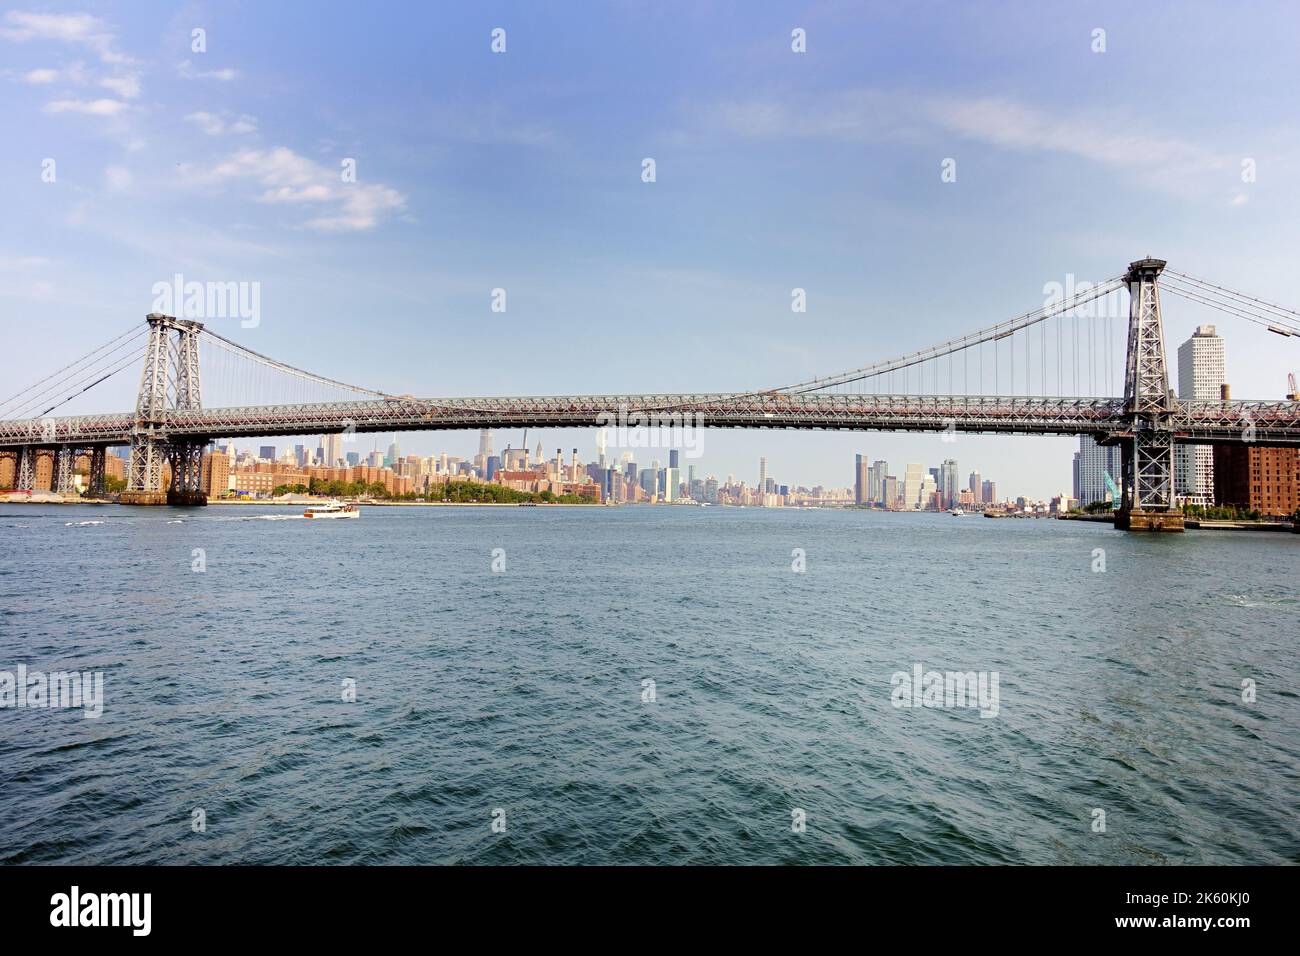 The Williamsburg Bridge on the East River in New York City Stock Photo